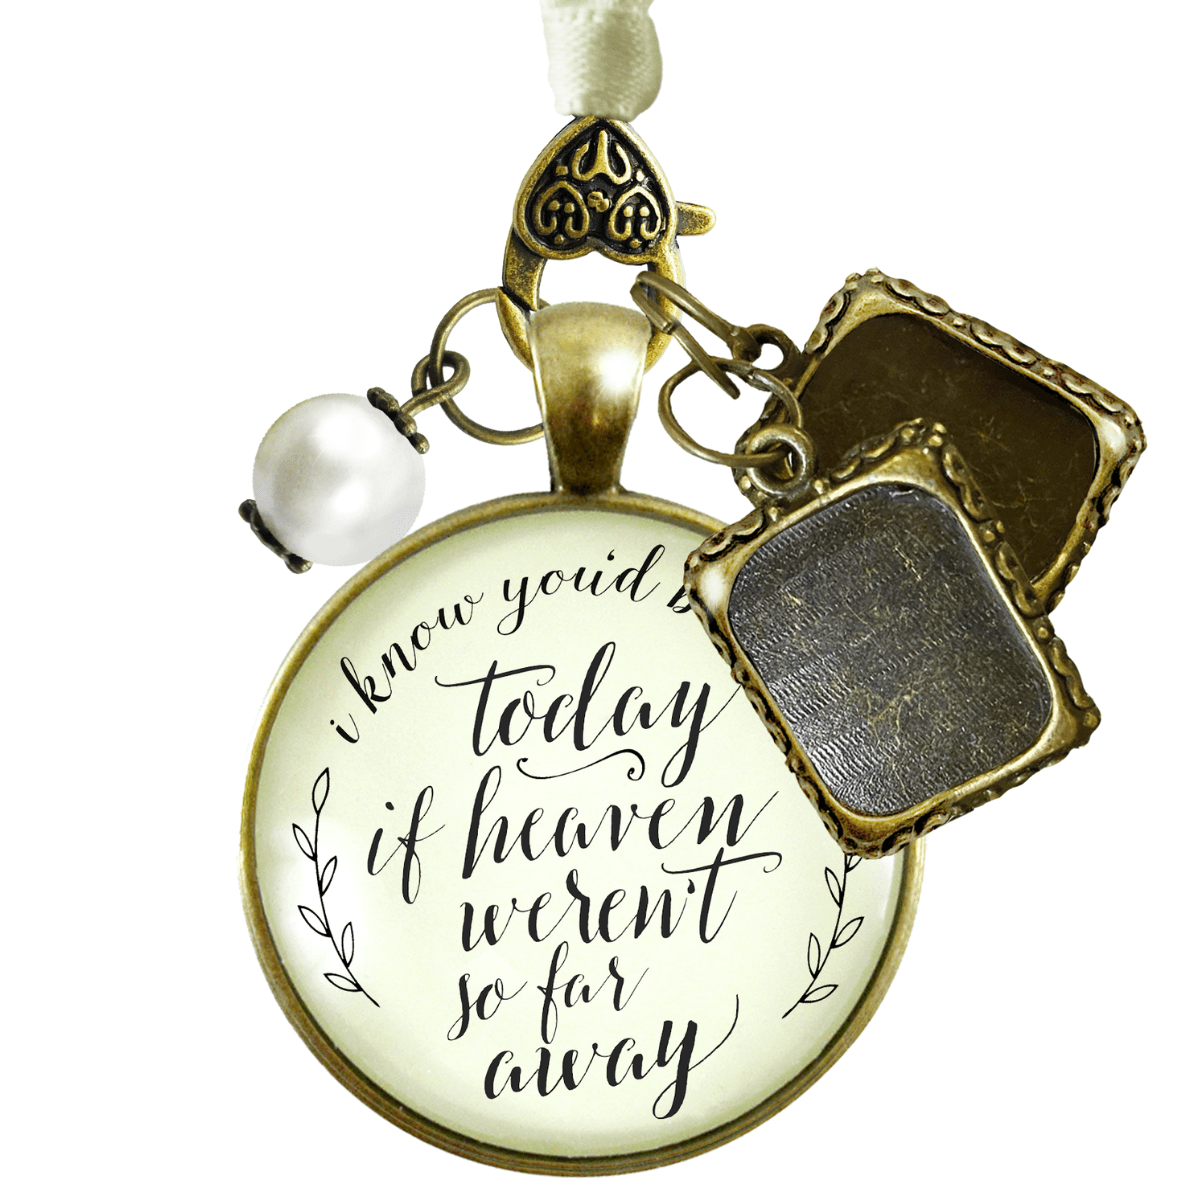 I Know You'd Be Here Today If Heaven Weren't So Far Away - BRONZE - CREAM - WHITE BEAD 2 FRAMES